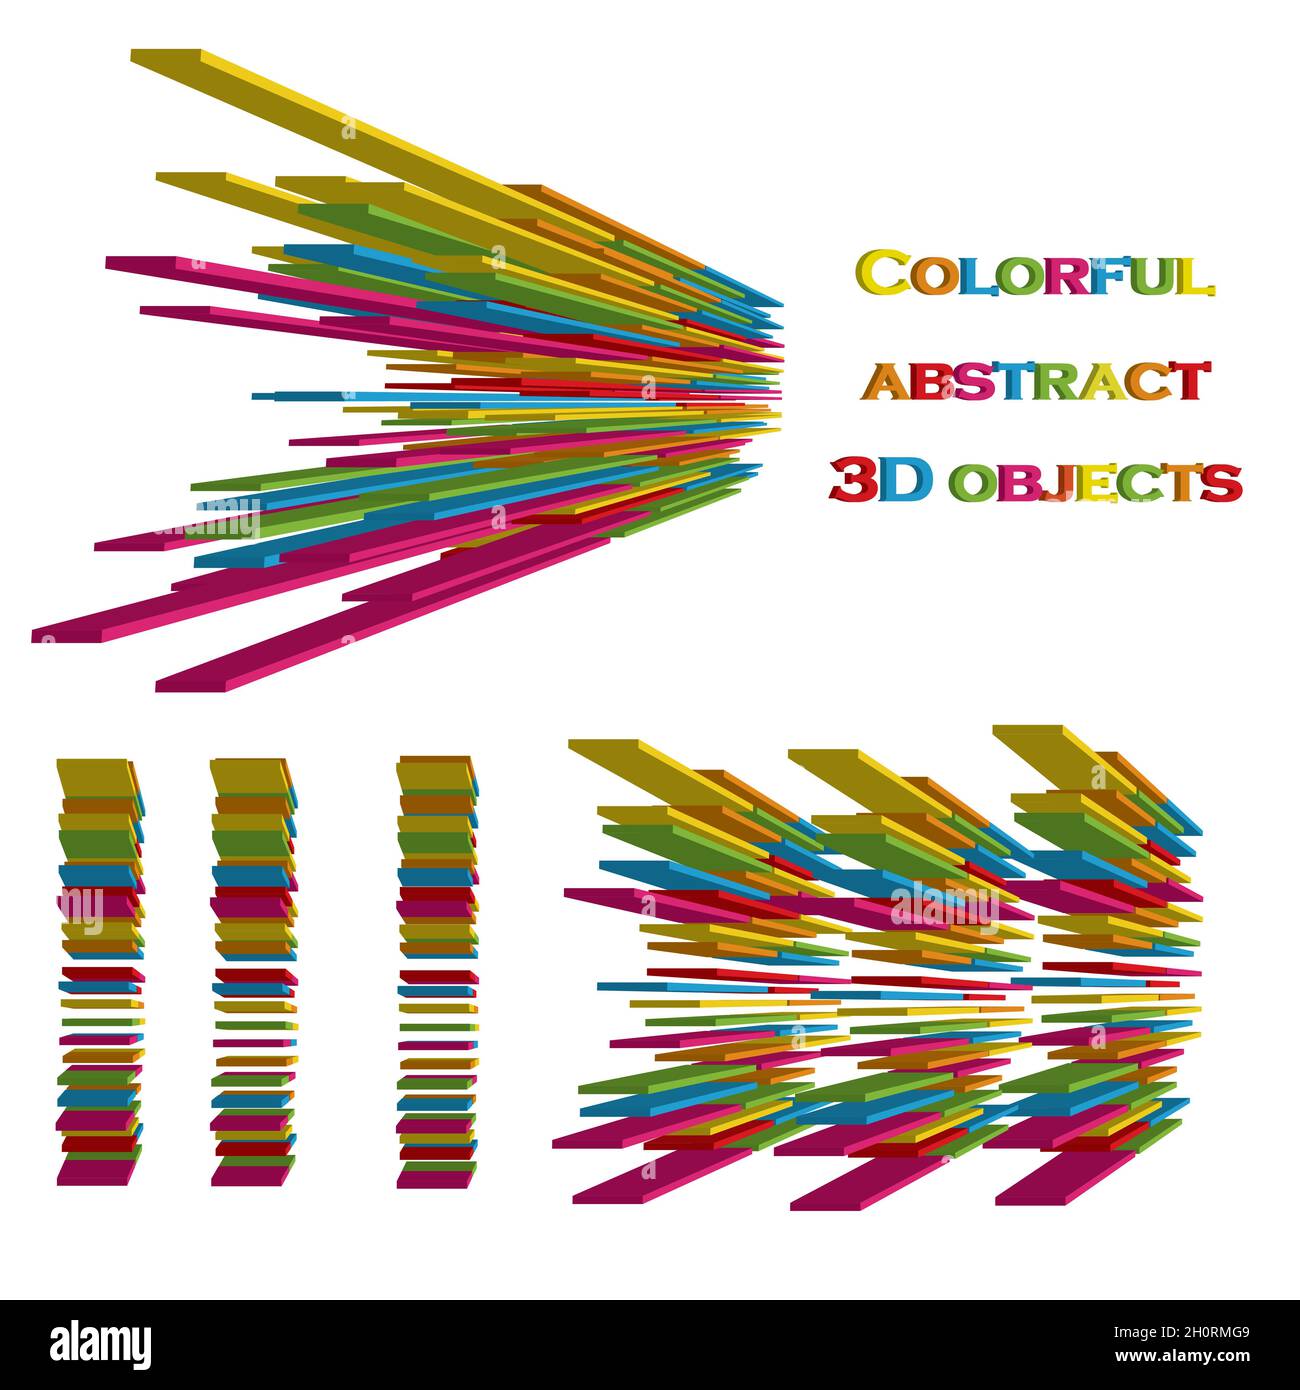 Colorful 3d abstract isolated shapes Stock Vector